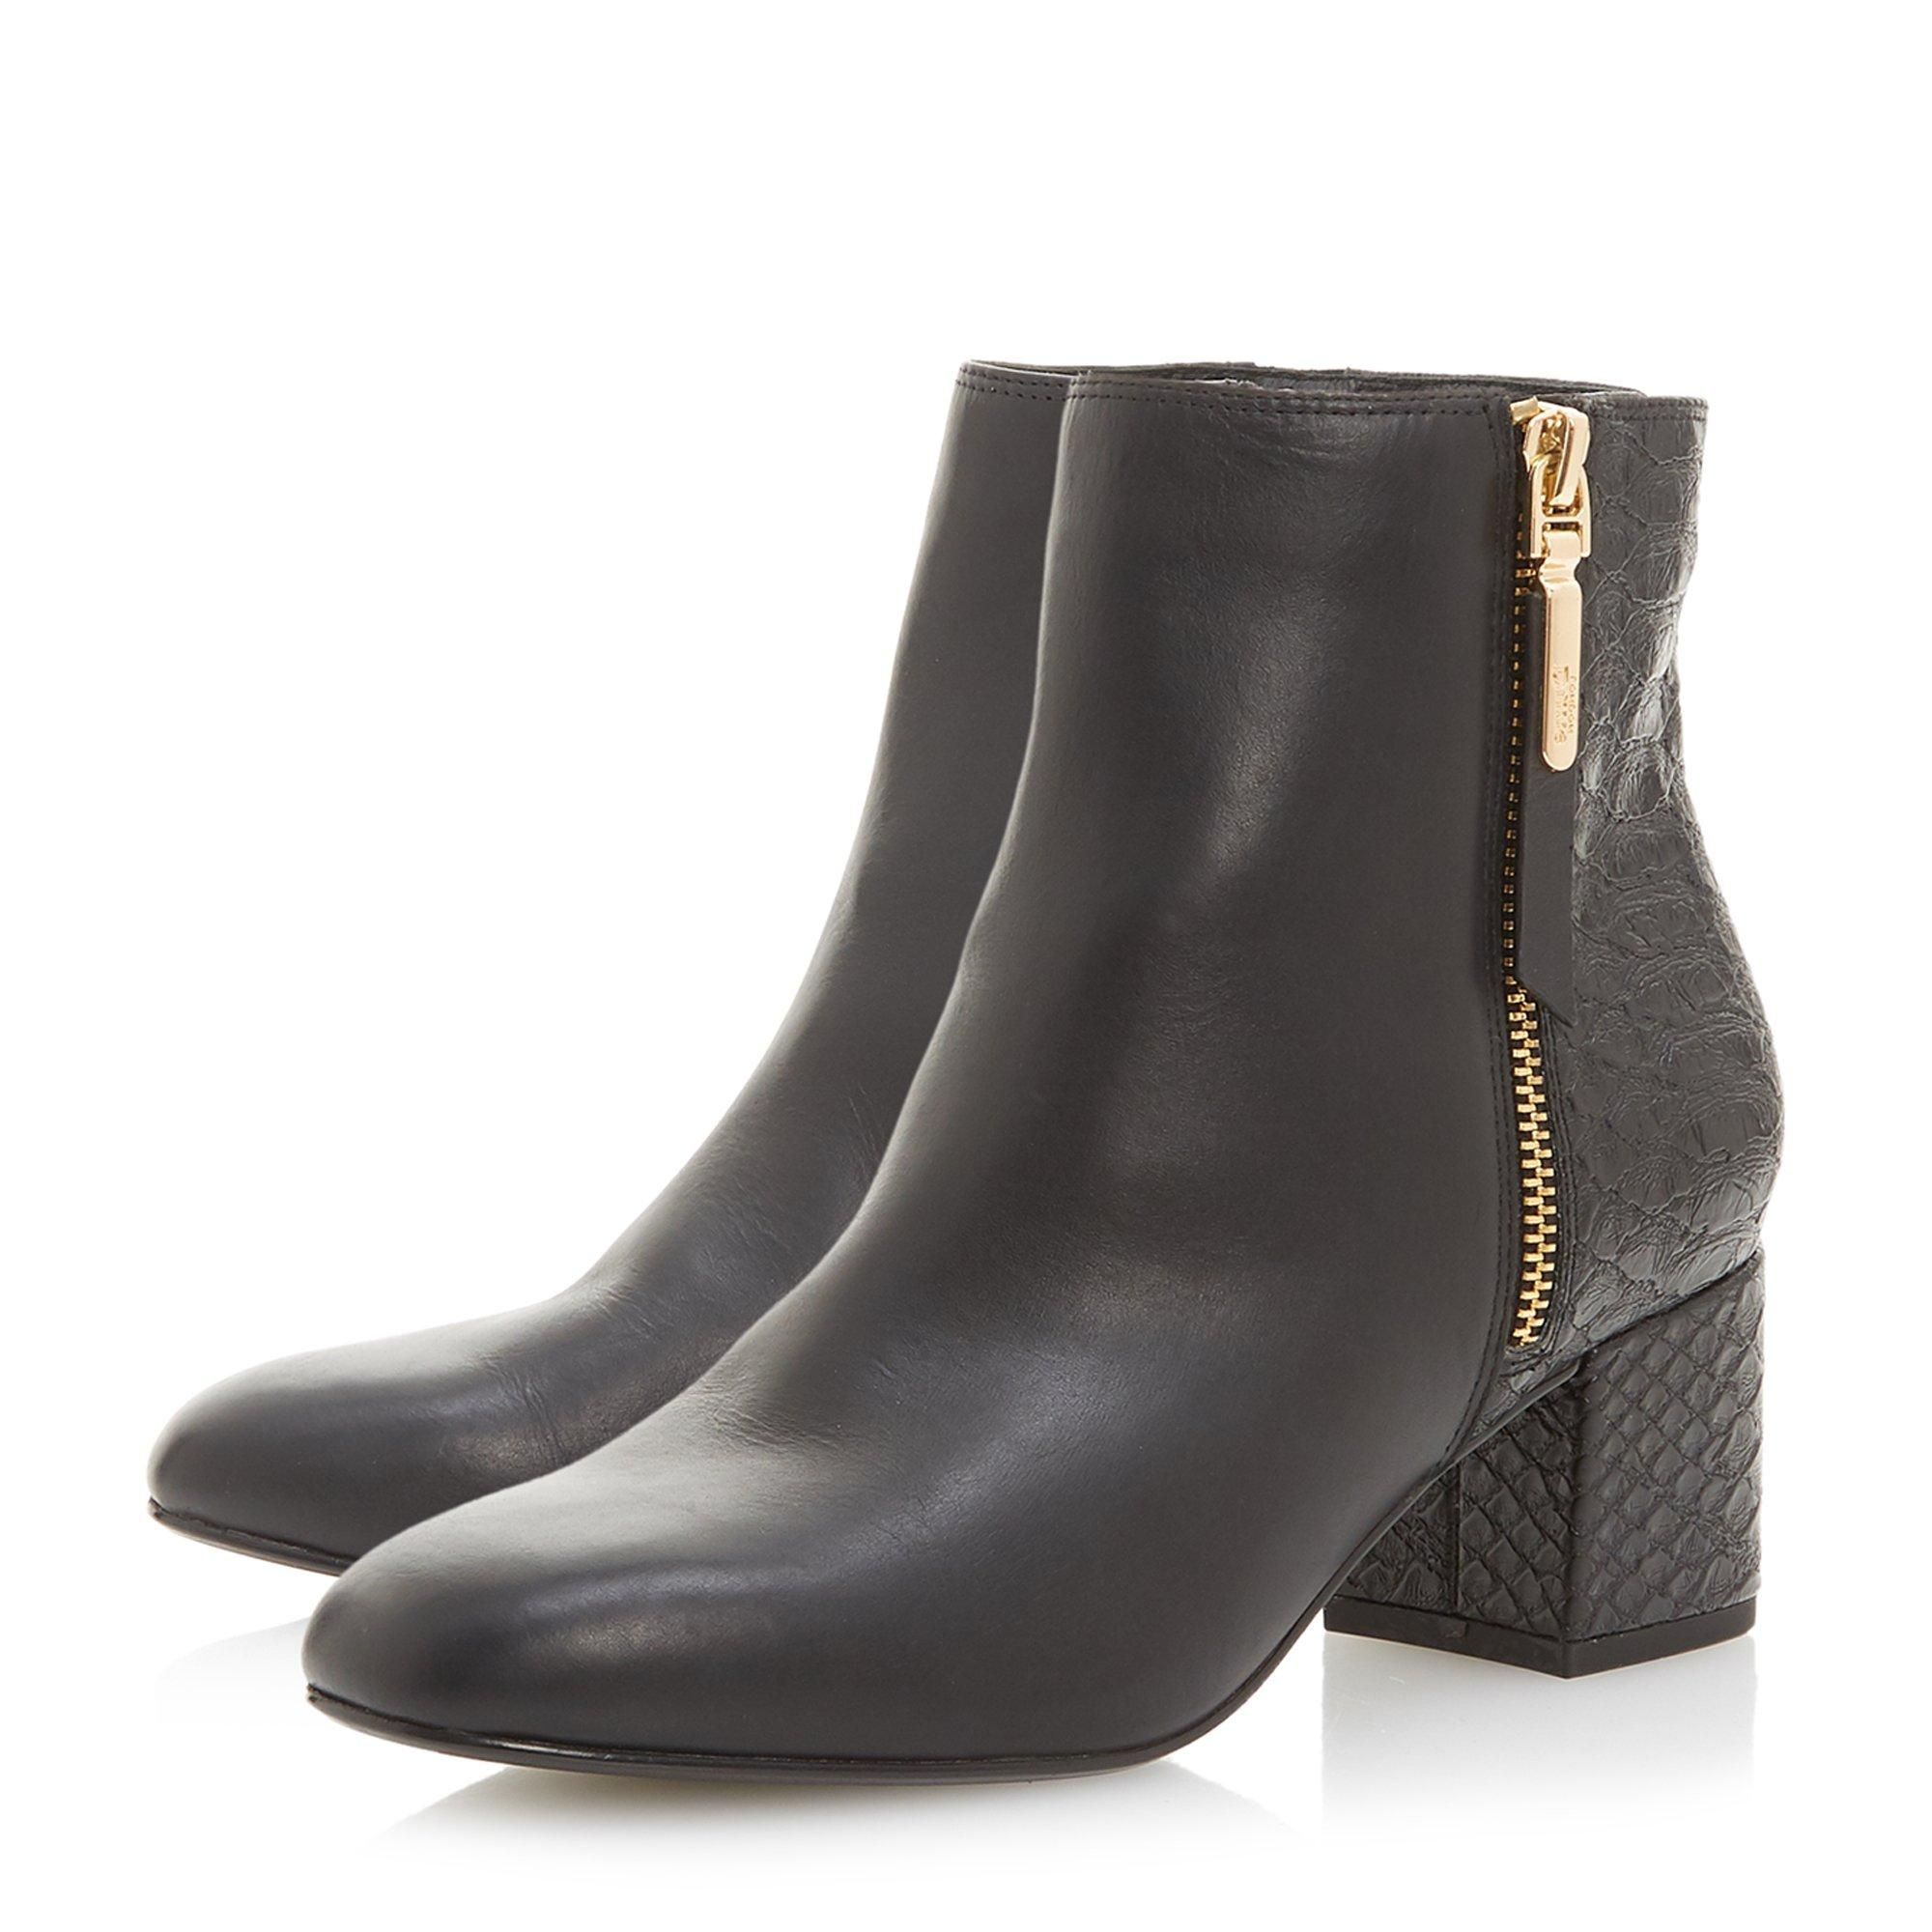 This Orrla ankle boot by Dune London is an everyday essential style. The sleek side zip silhouette features a round toe and a low heel. Great for both day and evening, it's the perfect fit for any outfit.